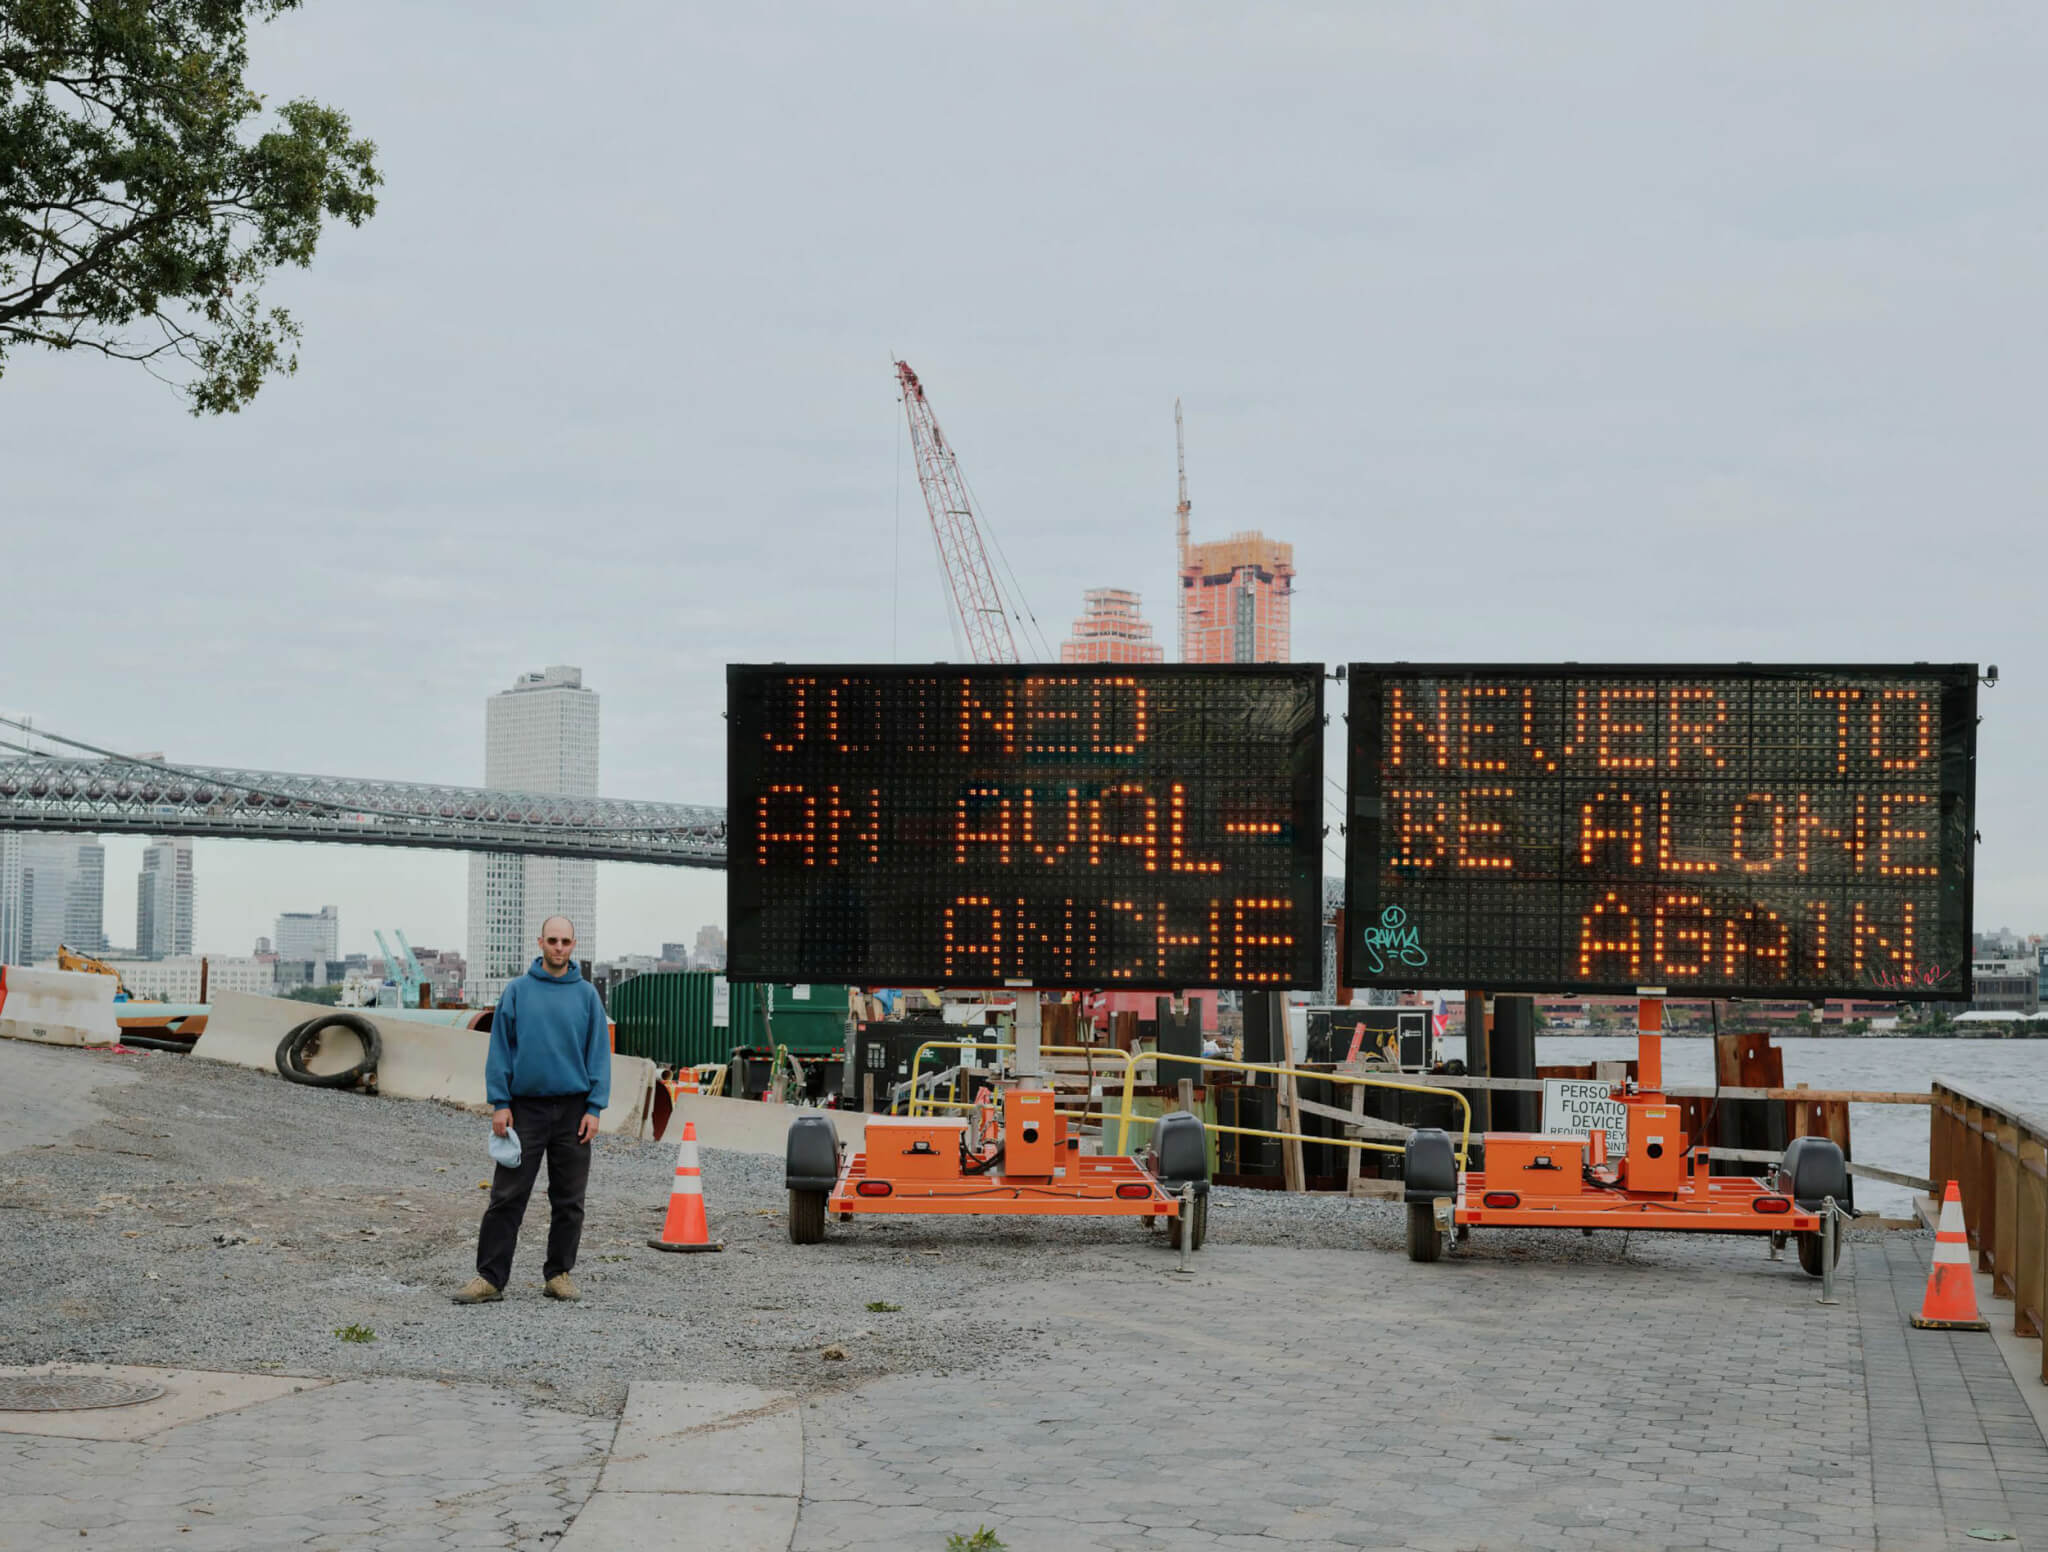 Man stands next to a construction sign that reads "Joined an avalanche, never to be alone again" overlooking the East River.